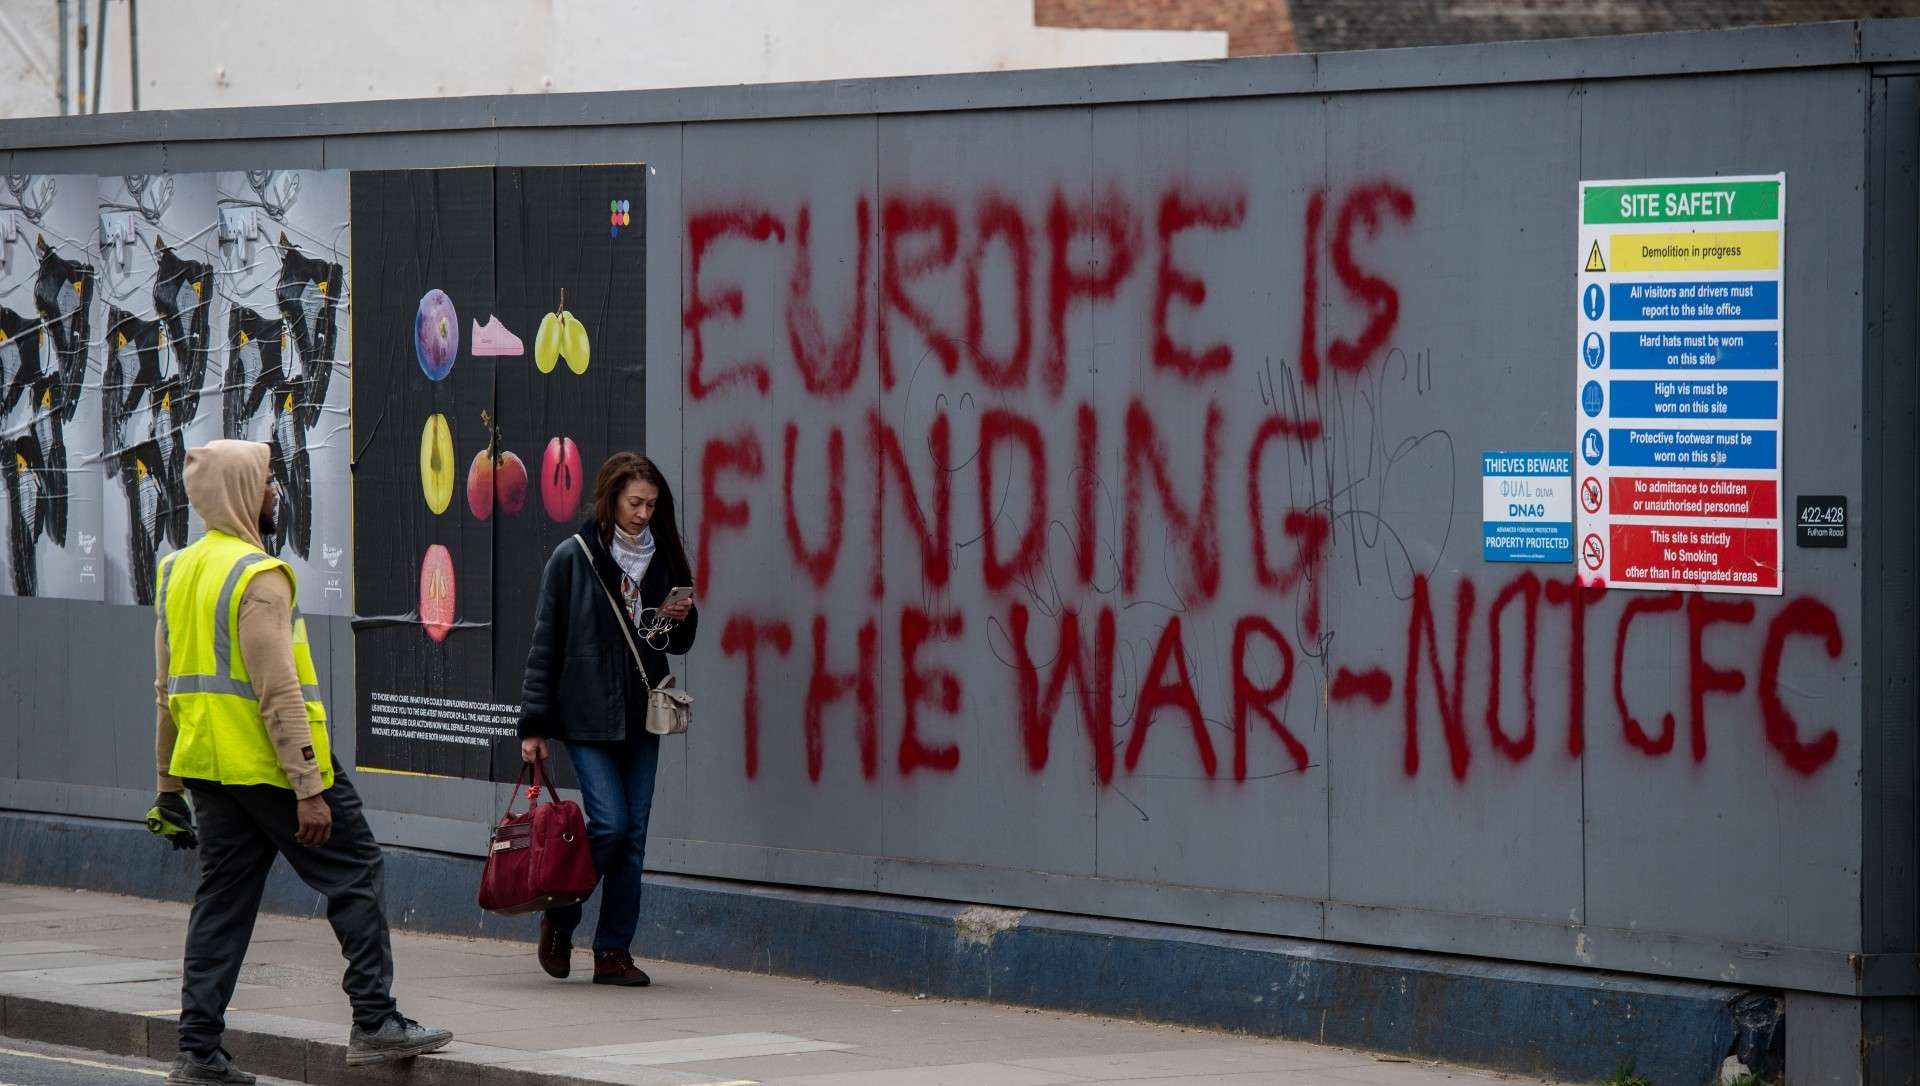 Europe is funding the war-not cfc